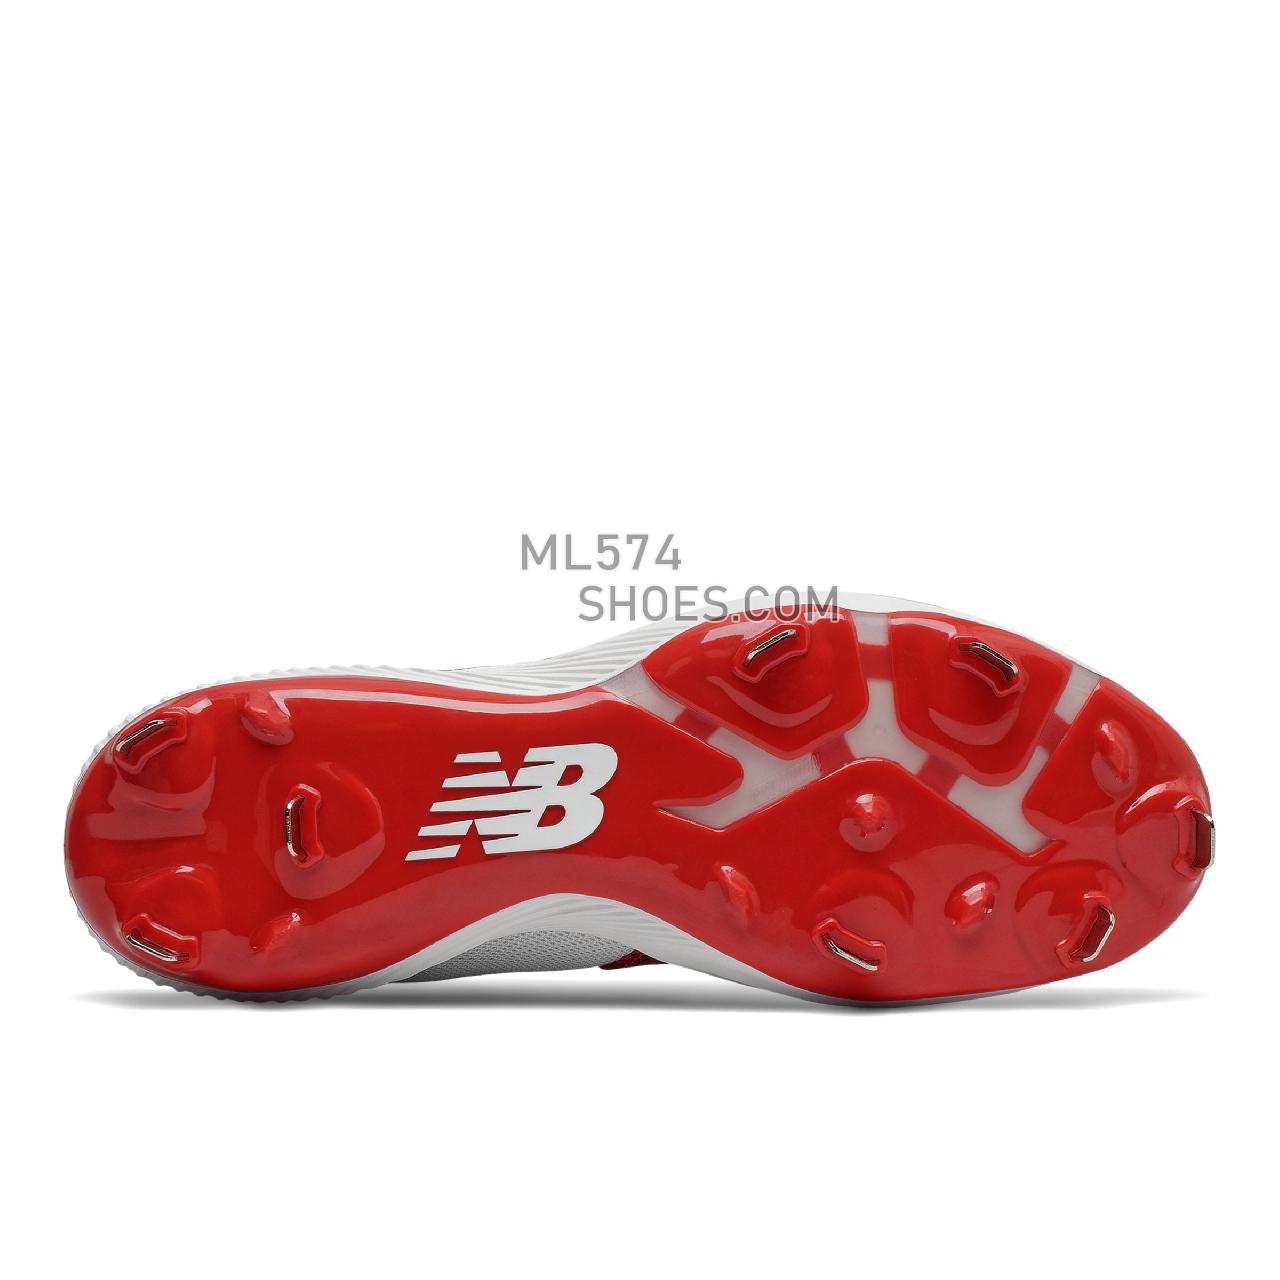 New Balance FuelCell 4040 v6 Metal - Men's Mid-Cut Baseball Cleats - Team Red with White - L4040TR6